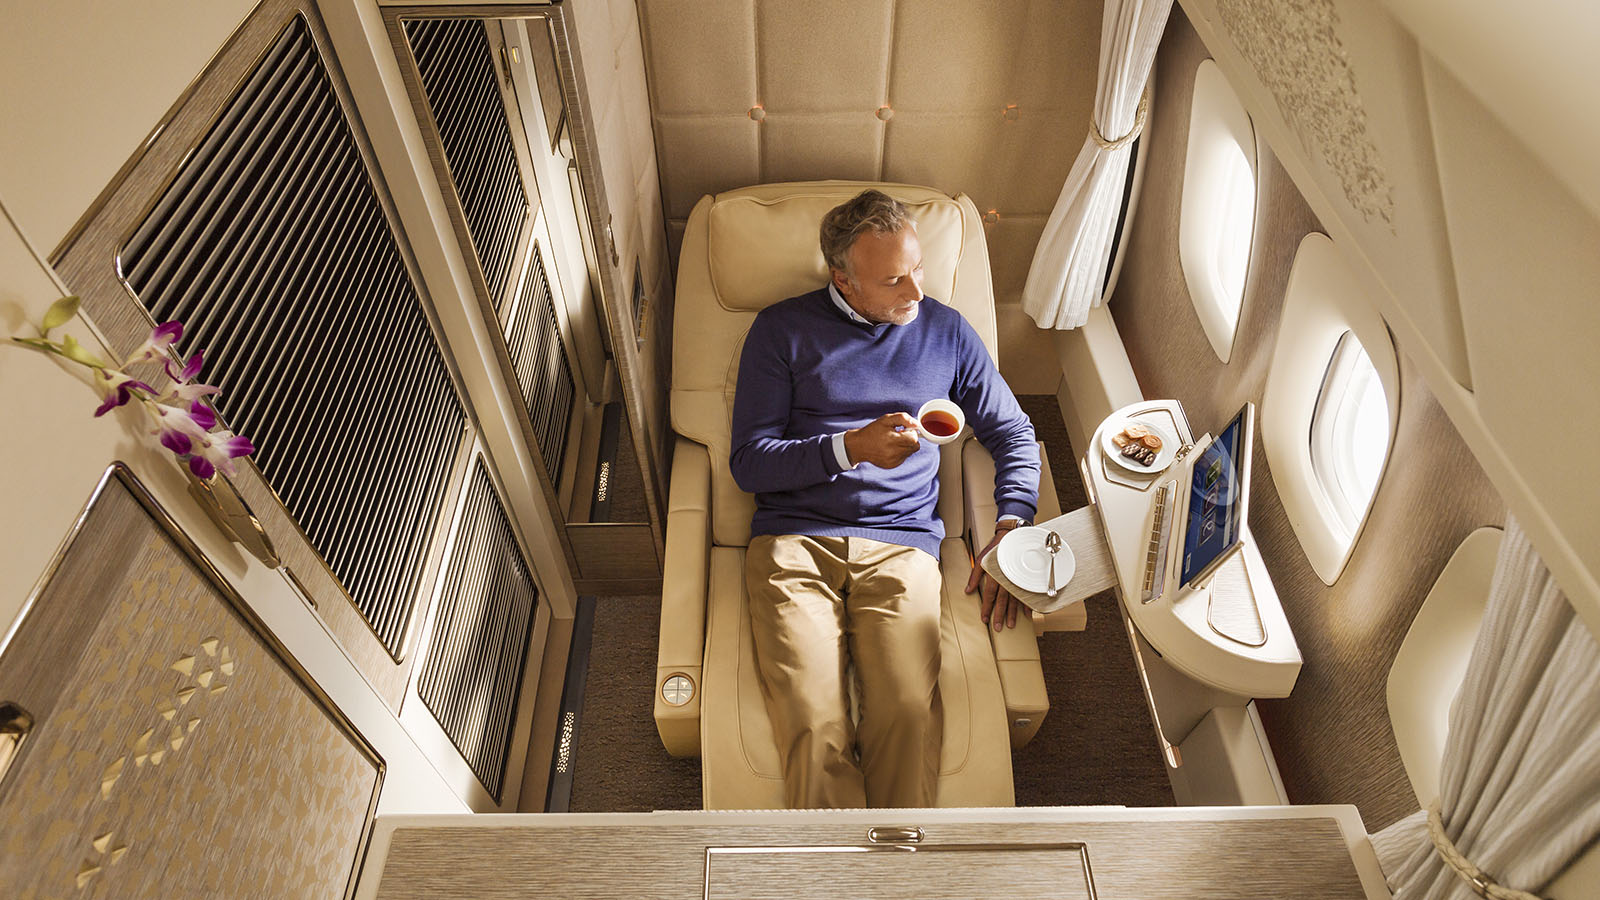 On some Boeing 777 flights, Emirates First Class is even more private